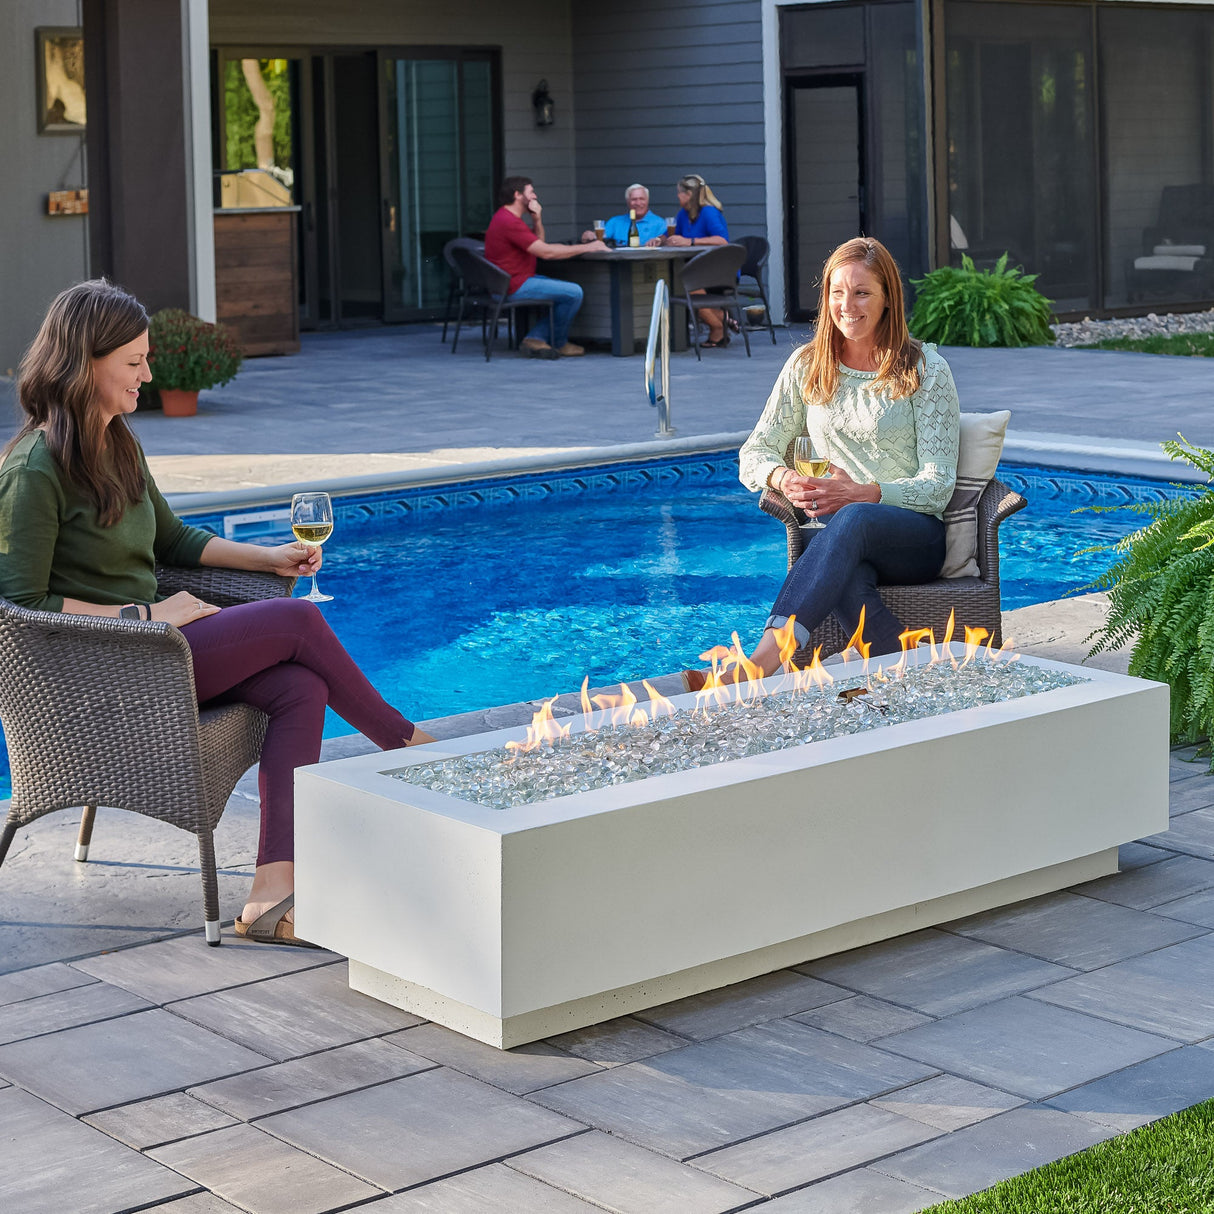 Individuals sitting around the White Cove Linear Gas Fire Pit Table 72" and relaxing next to the pool